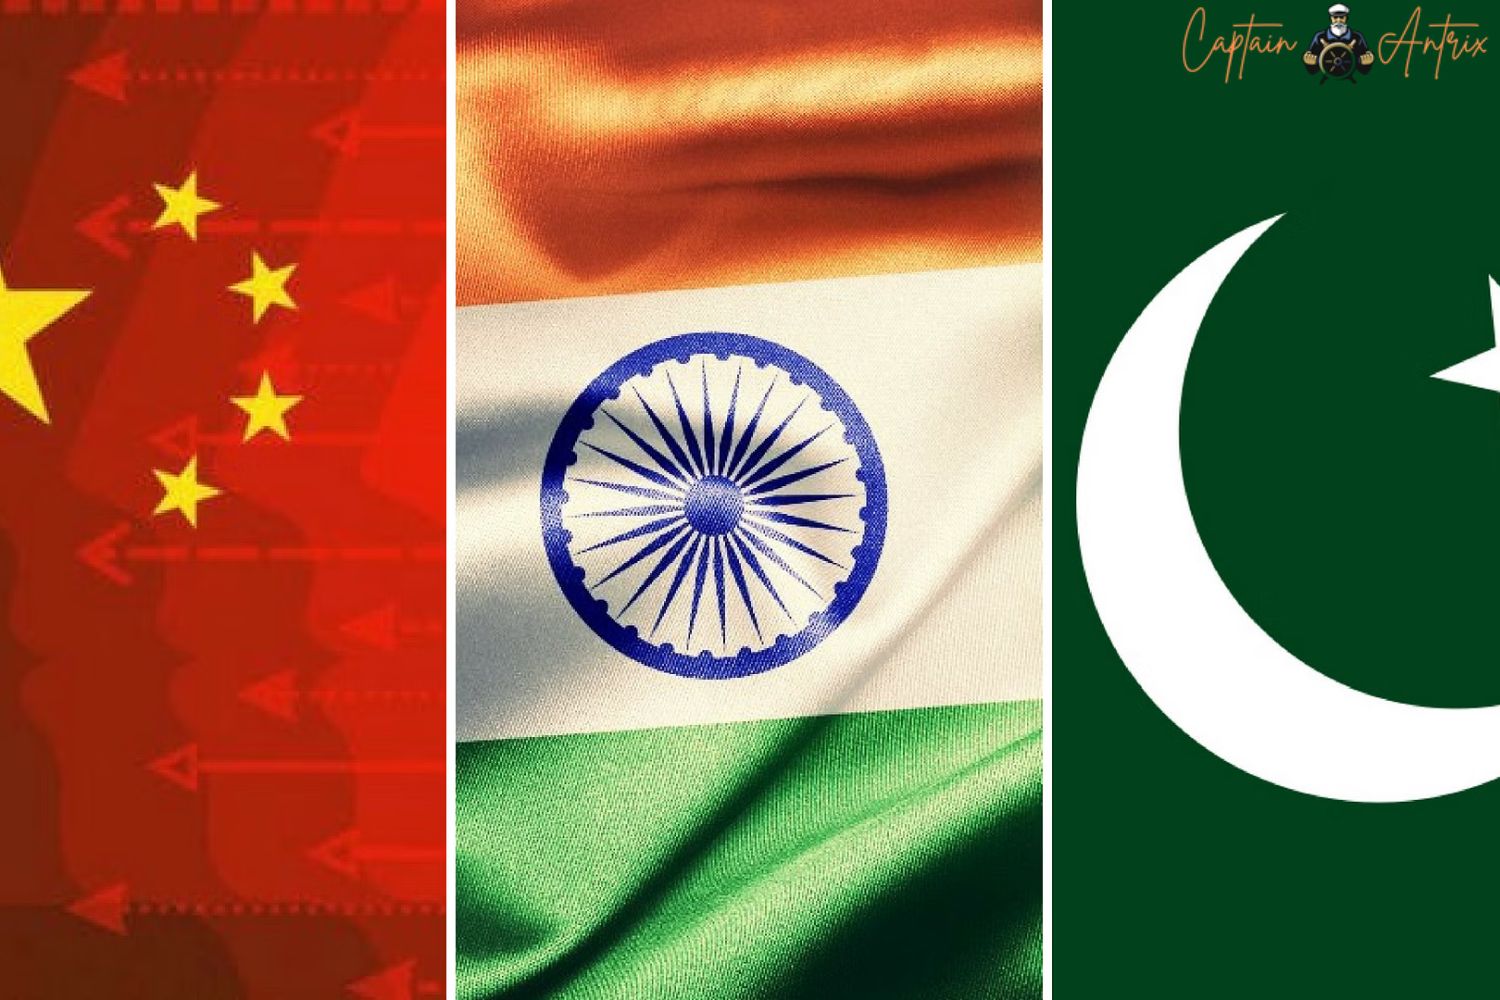 The Shocking Truth Behind the Explosive India-China-Pakistan Conflict Revealed!